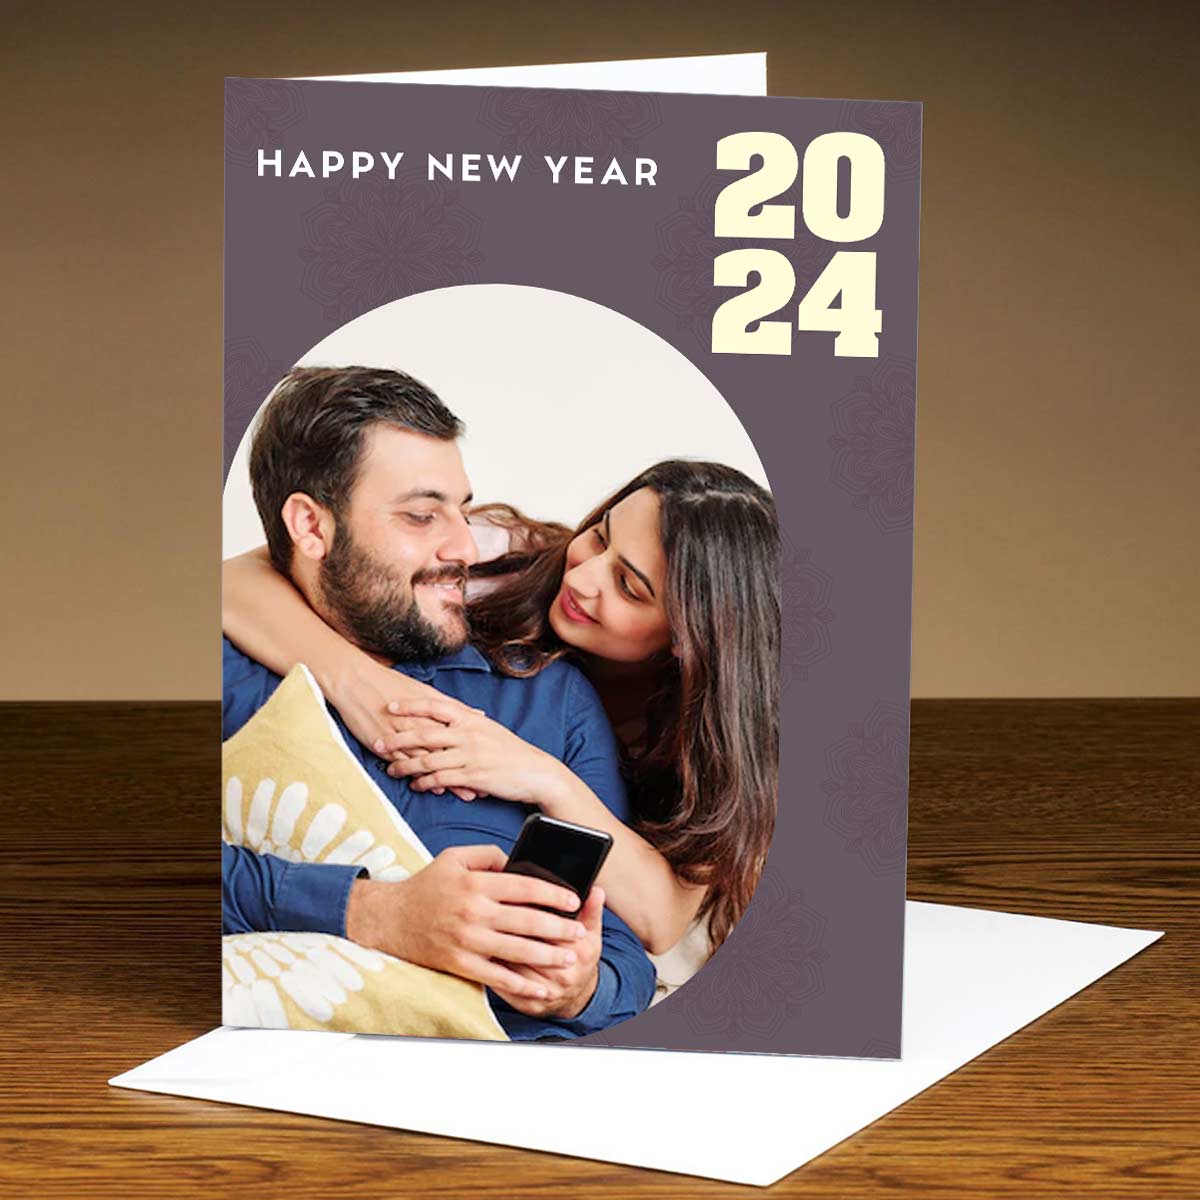 Happy New Year 2023 Background New Year Holidays Card Bright Stock Photo by  ©avgustin 524995986